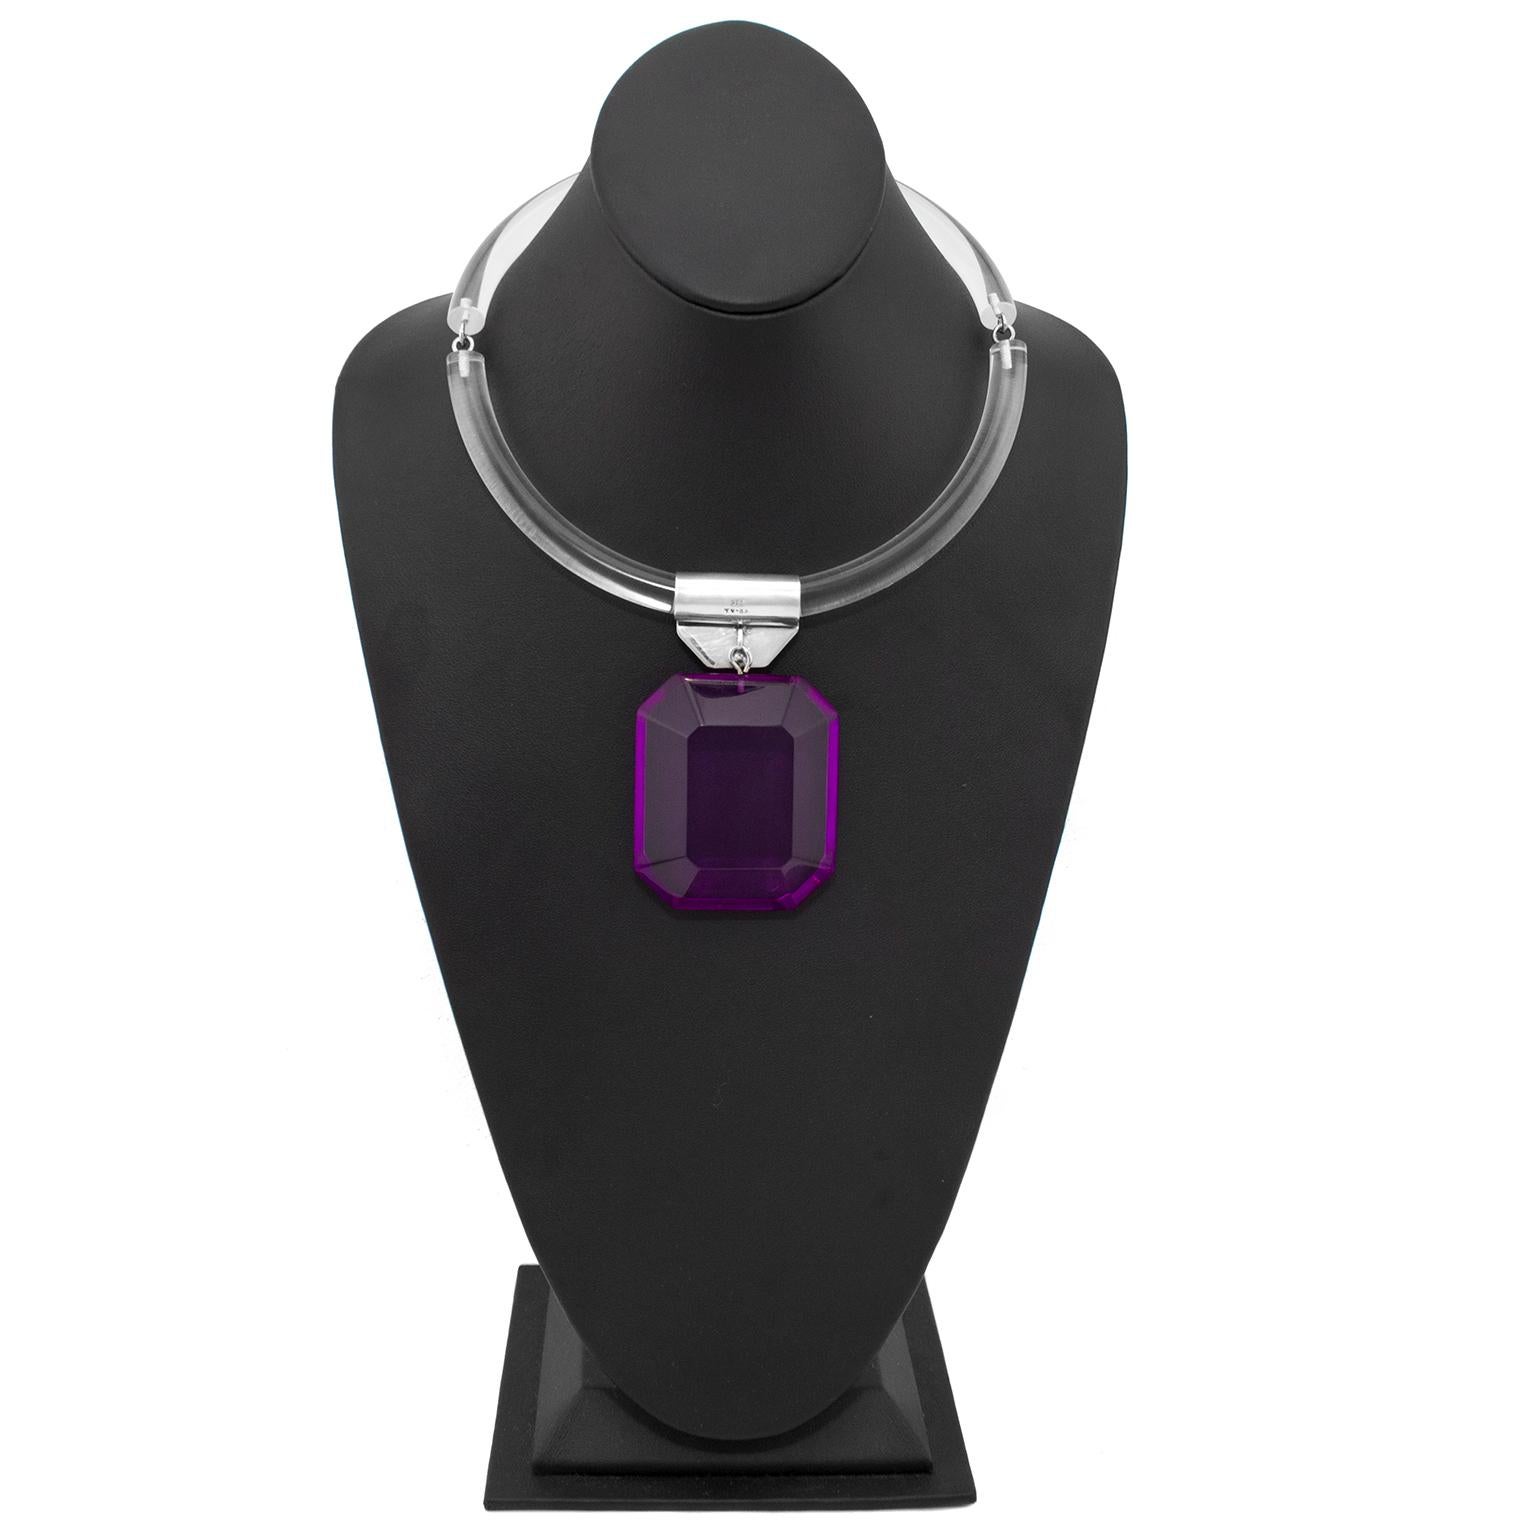 Fabulous 1980s Judith Hendler tube ring necklace with hanging purple acrylic pendant. The bright purple rectangular pendant is faceted on the sides and it hangs from a flat silver link. The necklace closes on the left side, the C-ring hooks into the